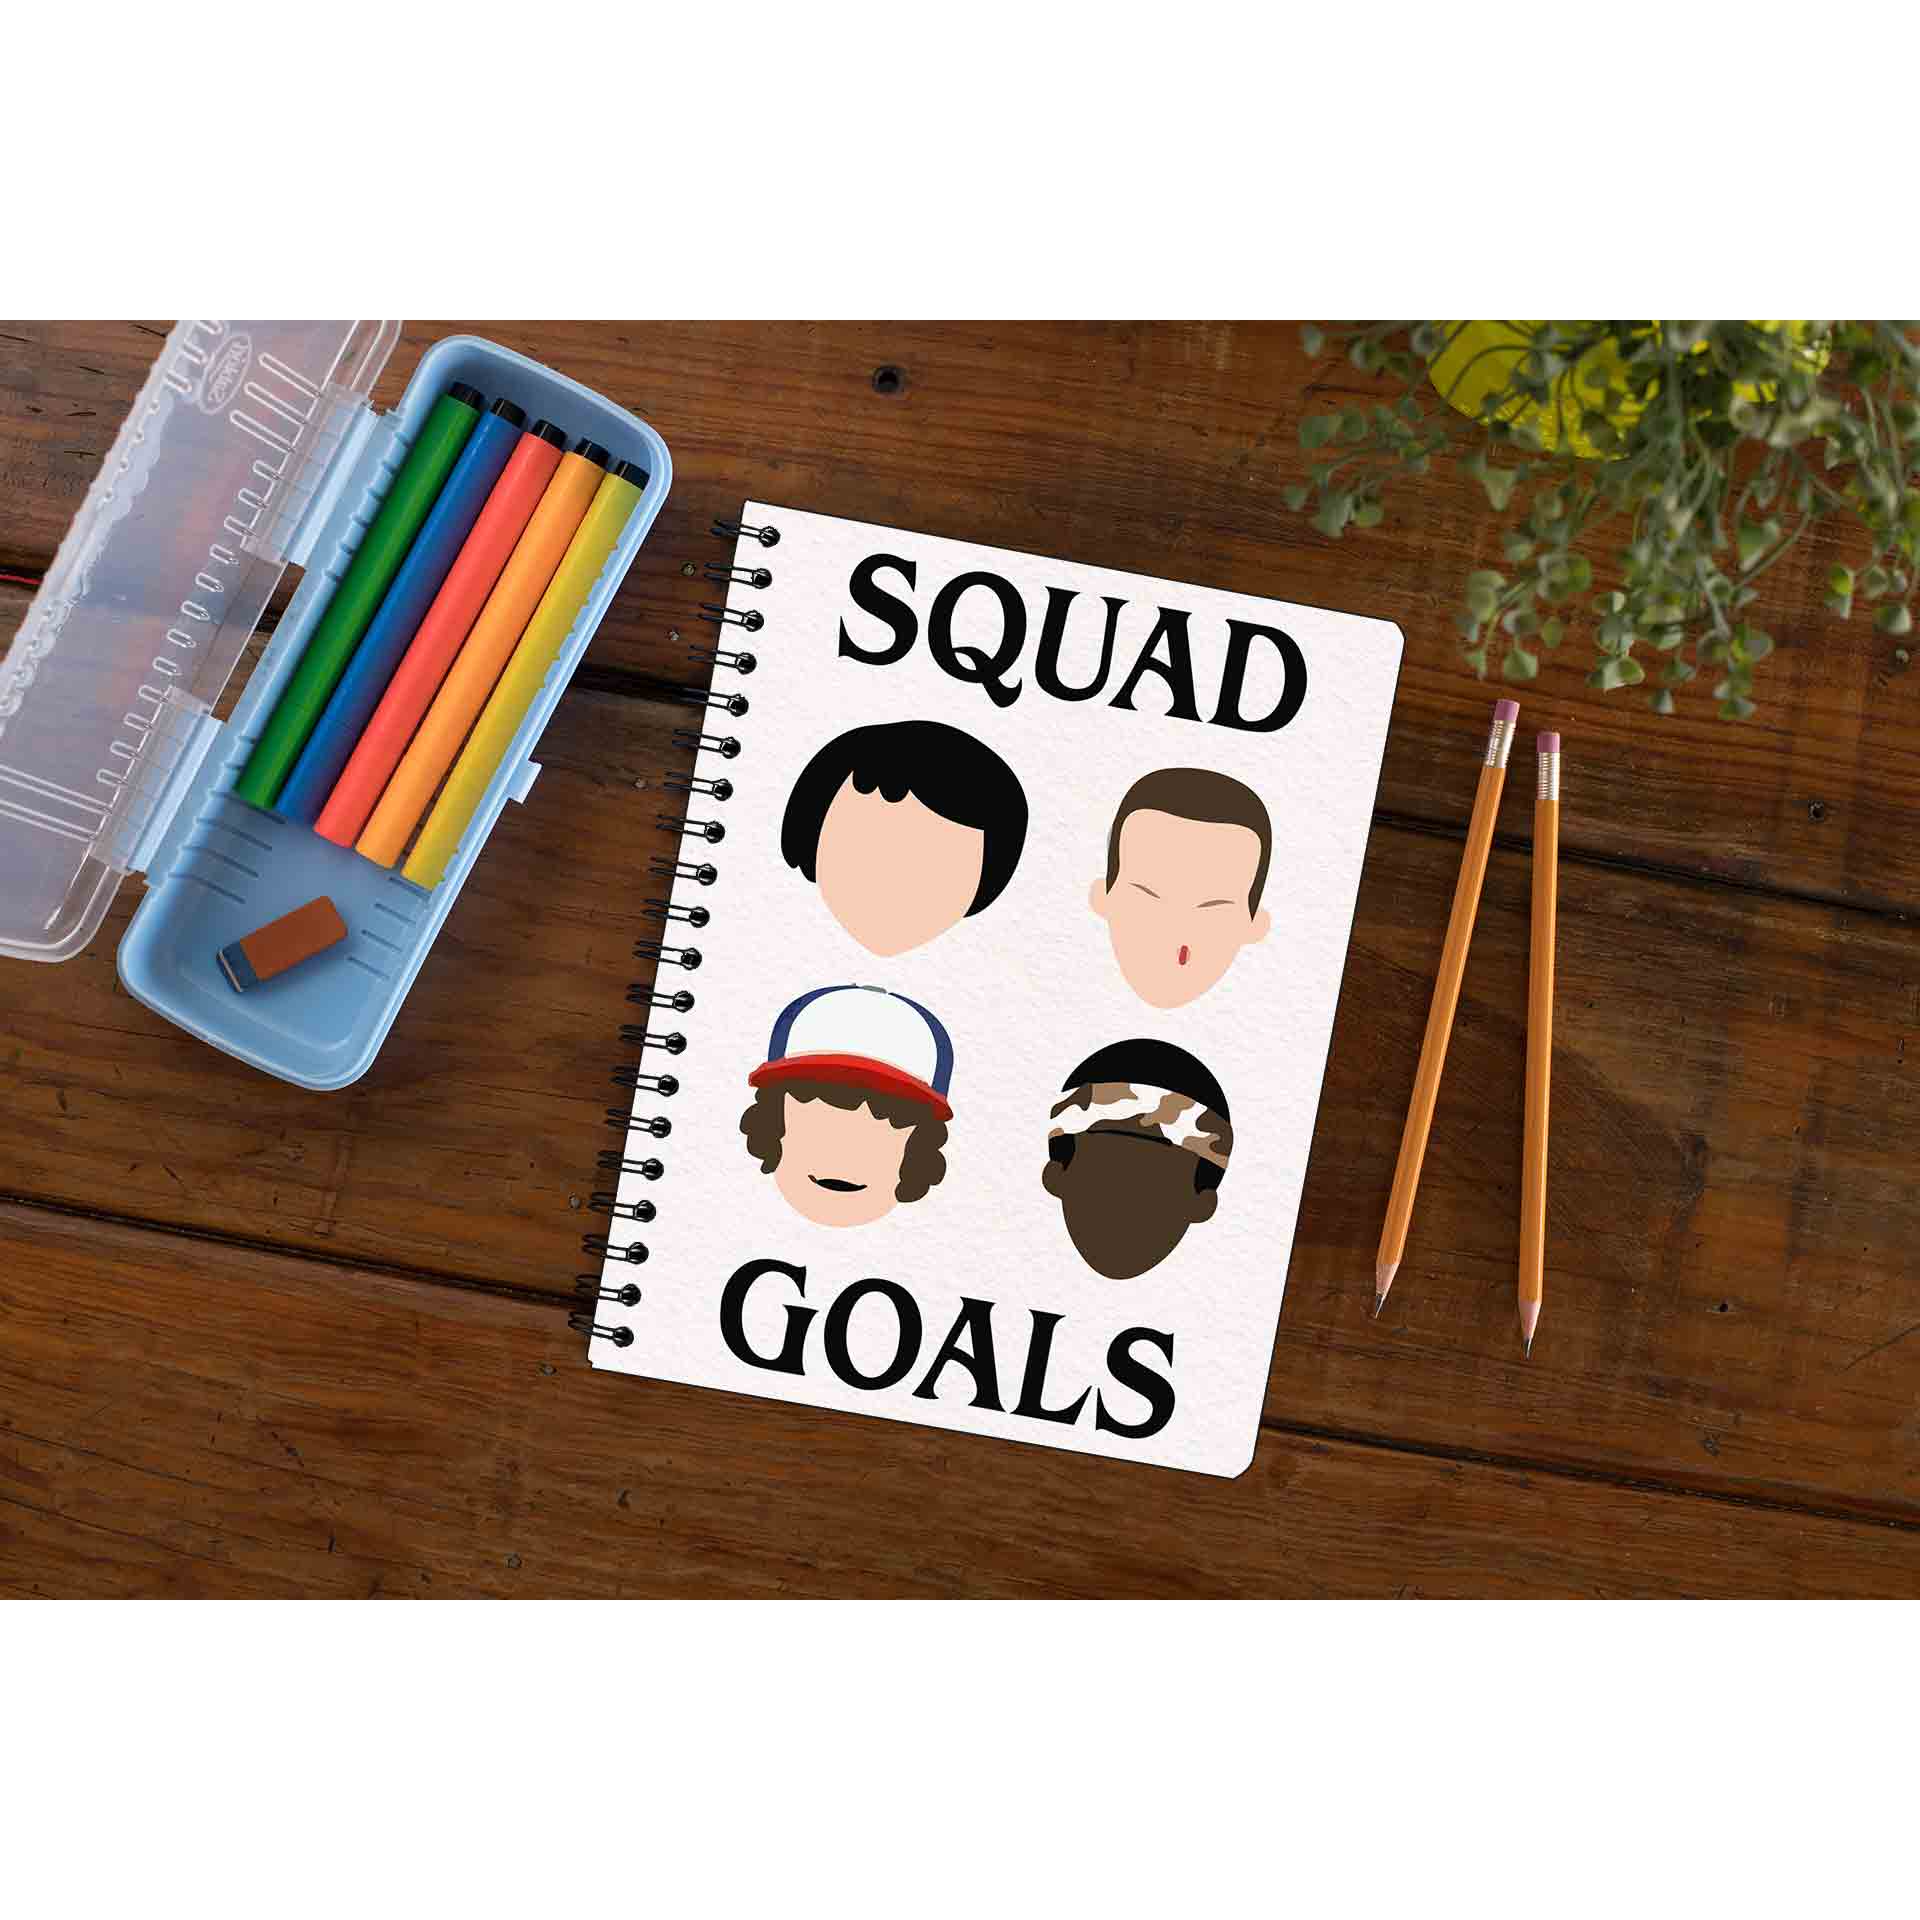 stranger things squad goals notebook notepad diary buy online india the banyan tee tbt unruled stranger things eleven demogorgon shadow monster dustin quote vector art clothing accessories merchandise